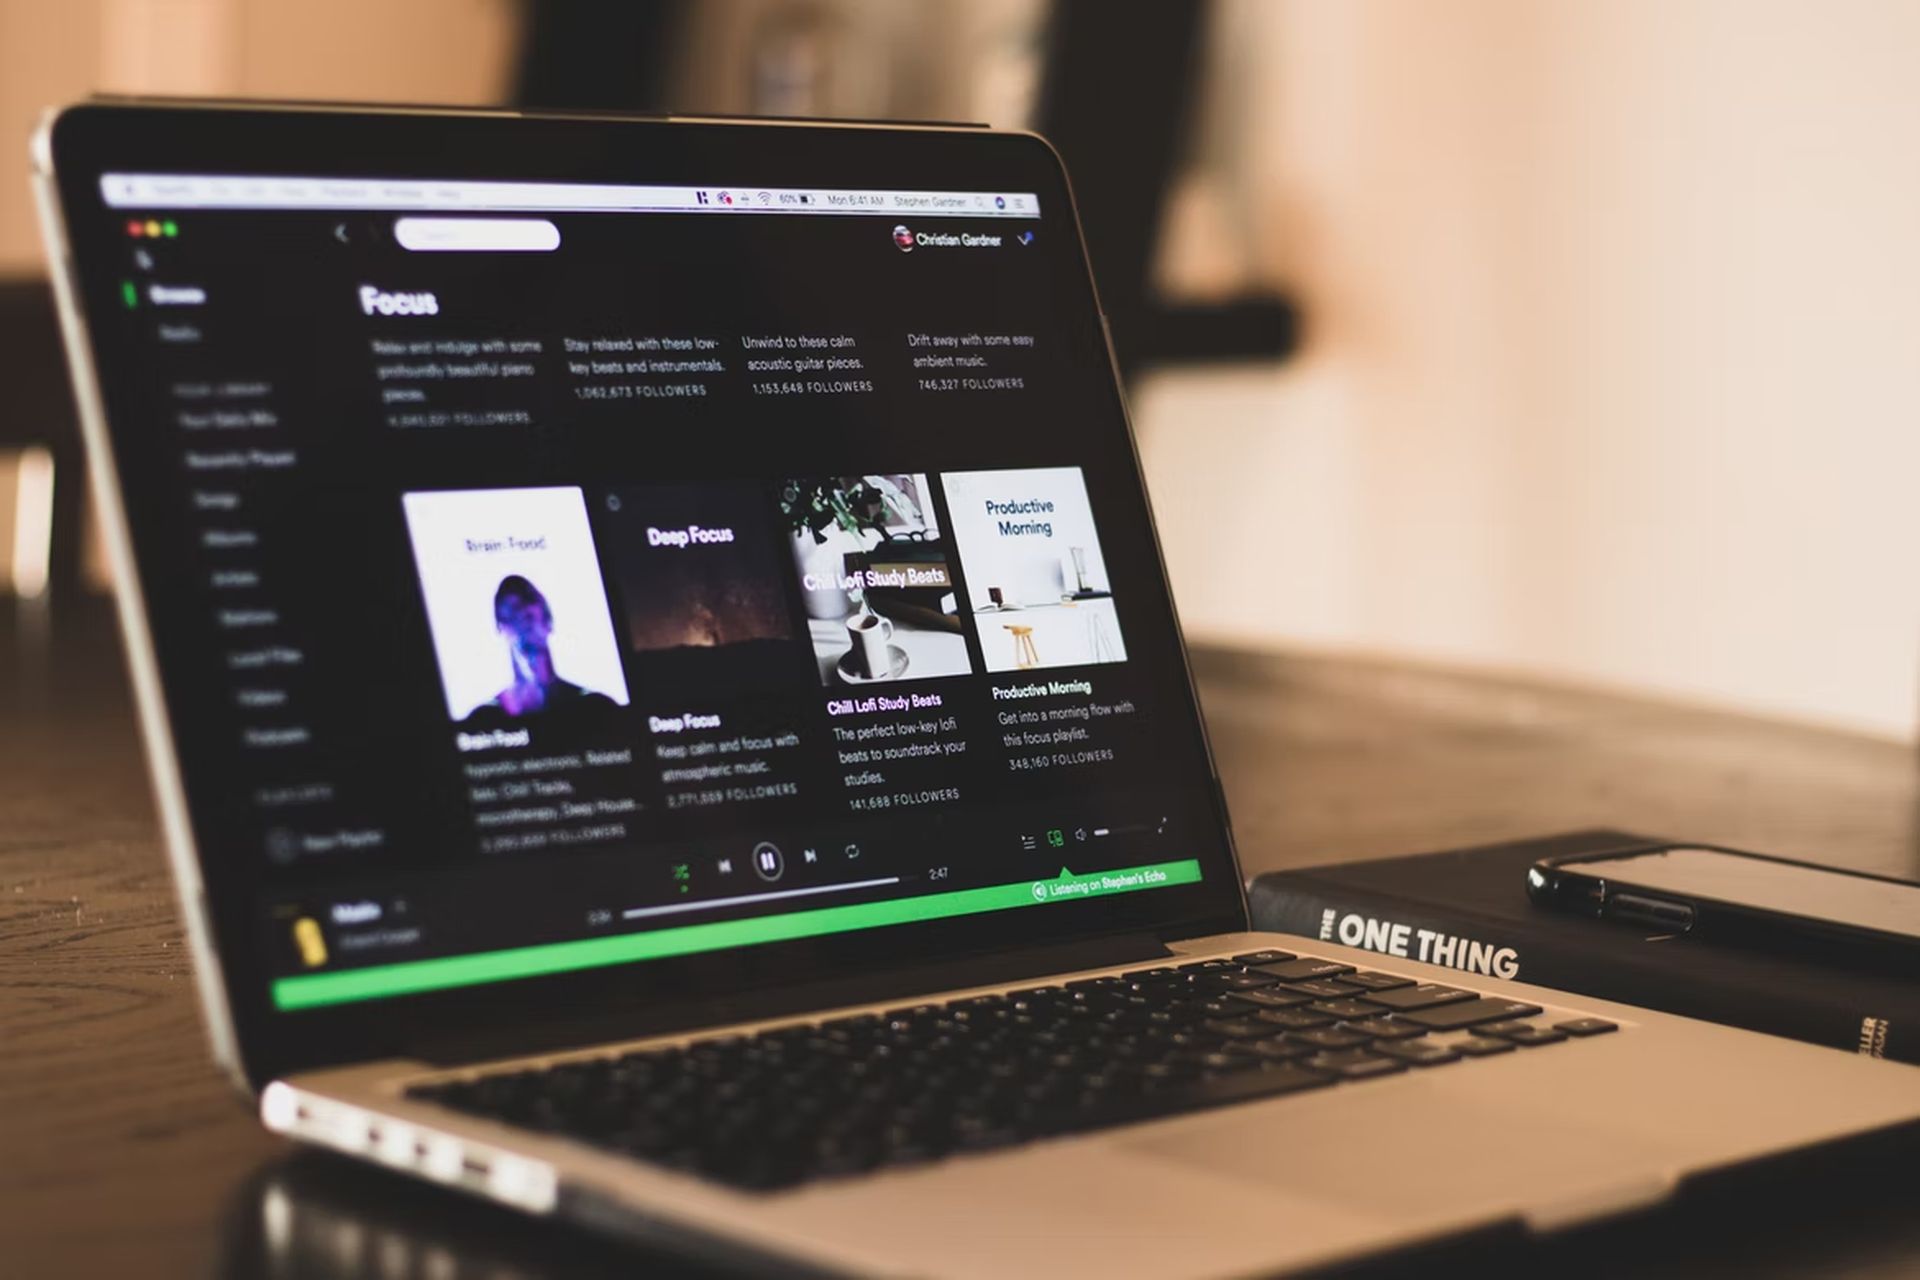 In today's article, we explain what is the Spotify timer, for how long you can set it up, and how to set it up for music and podcasts.